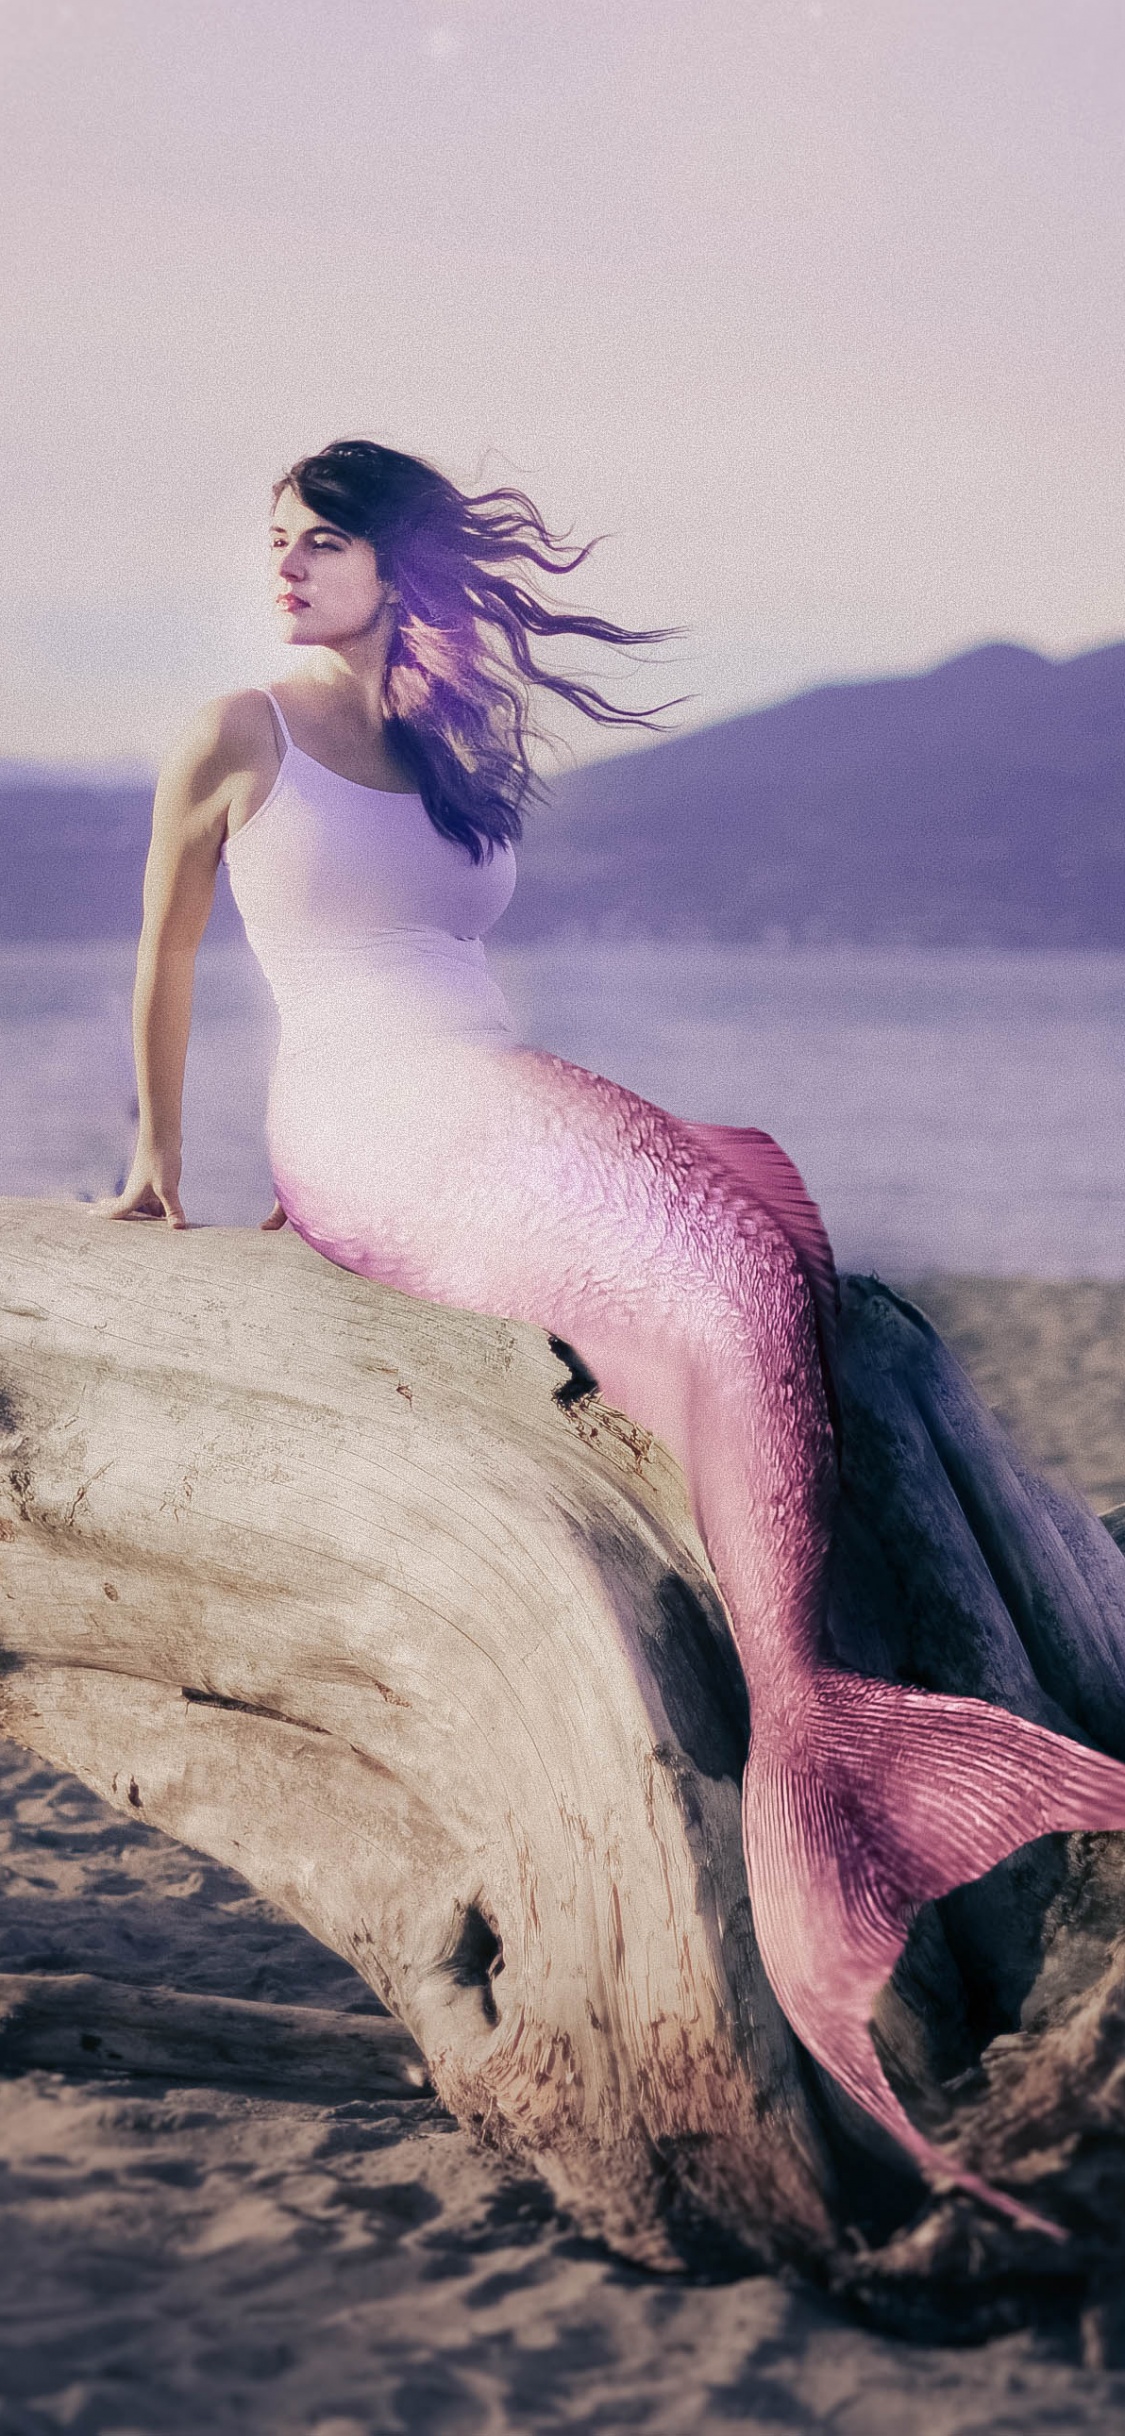 Mermaid Wallpaper Pictures  Download Free Images on Unsplash